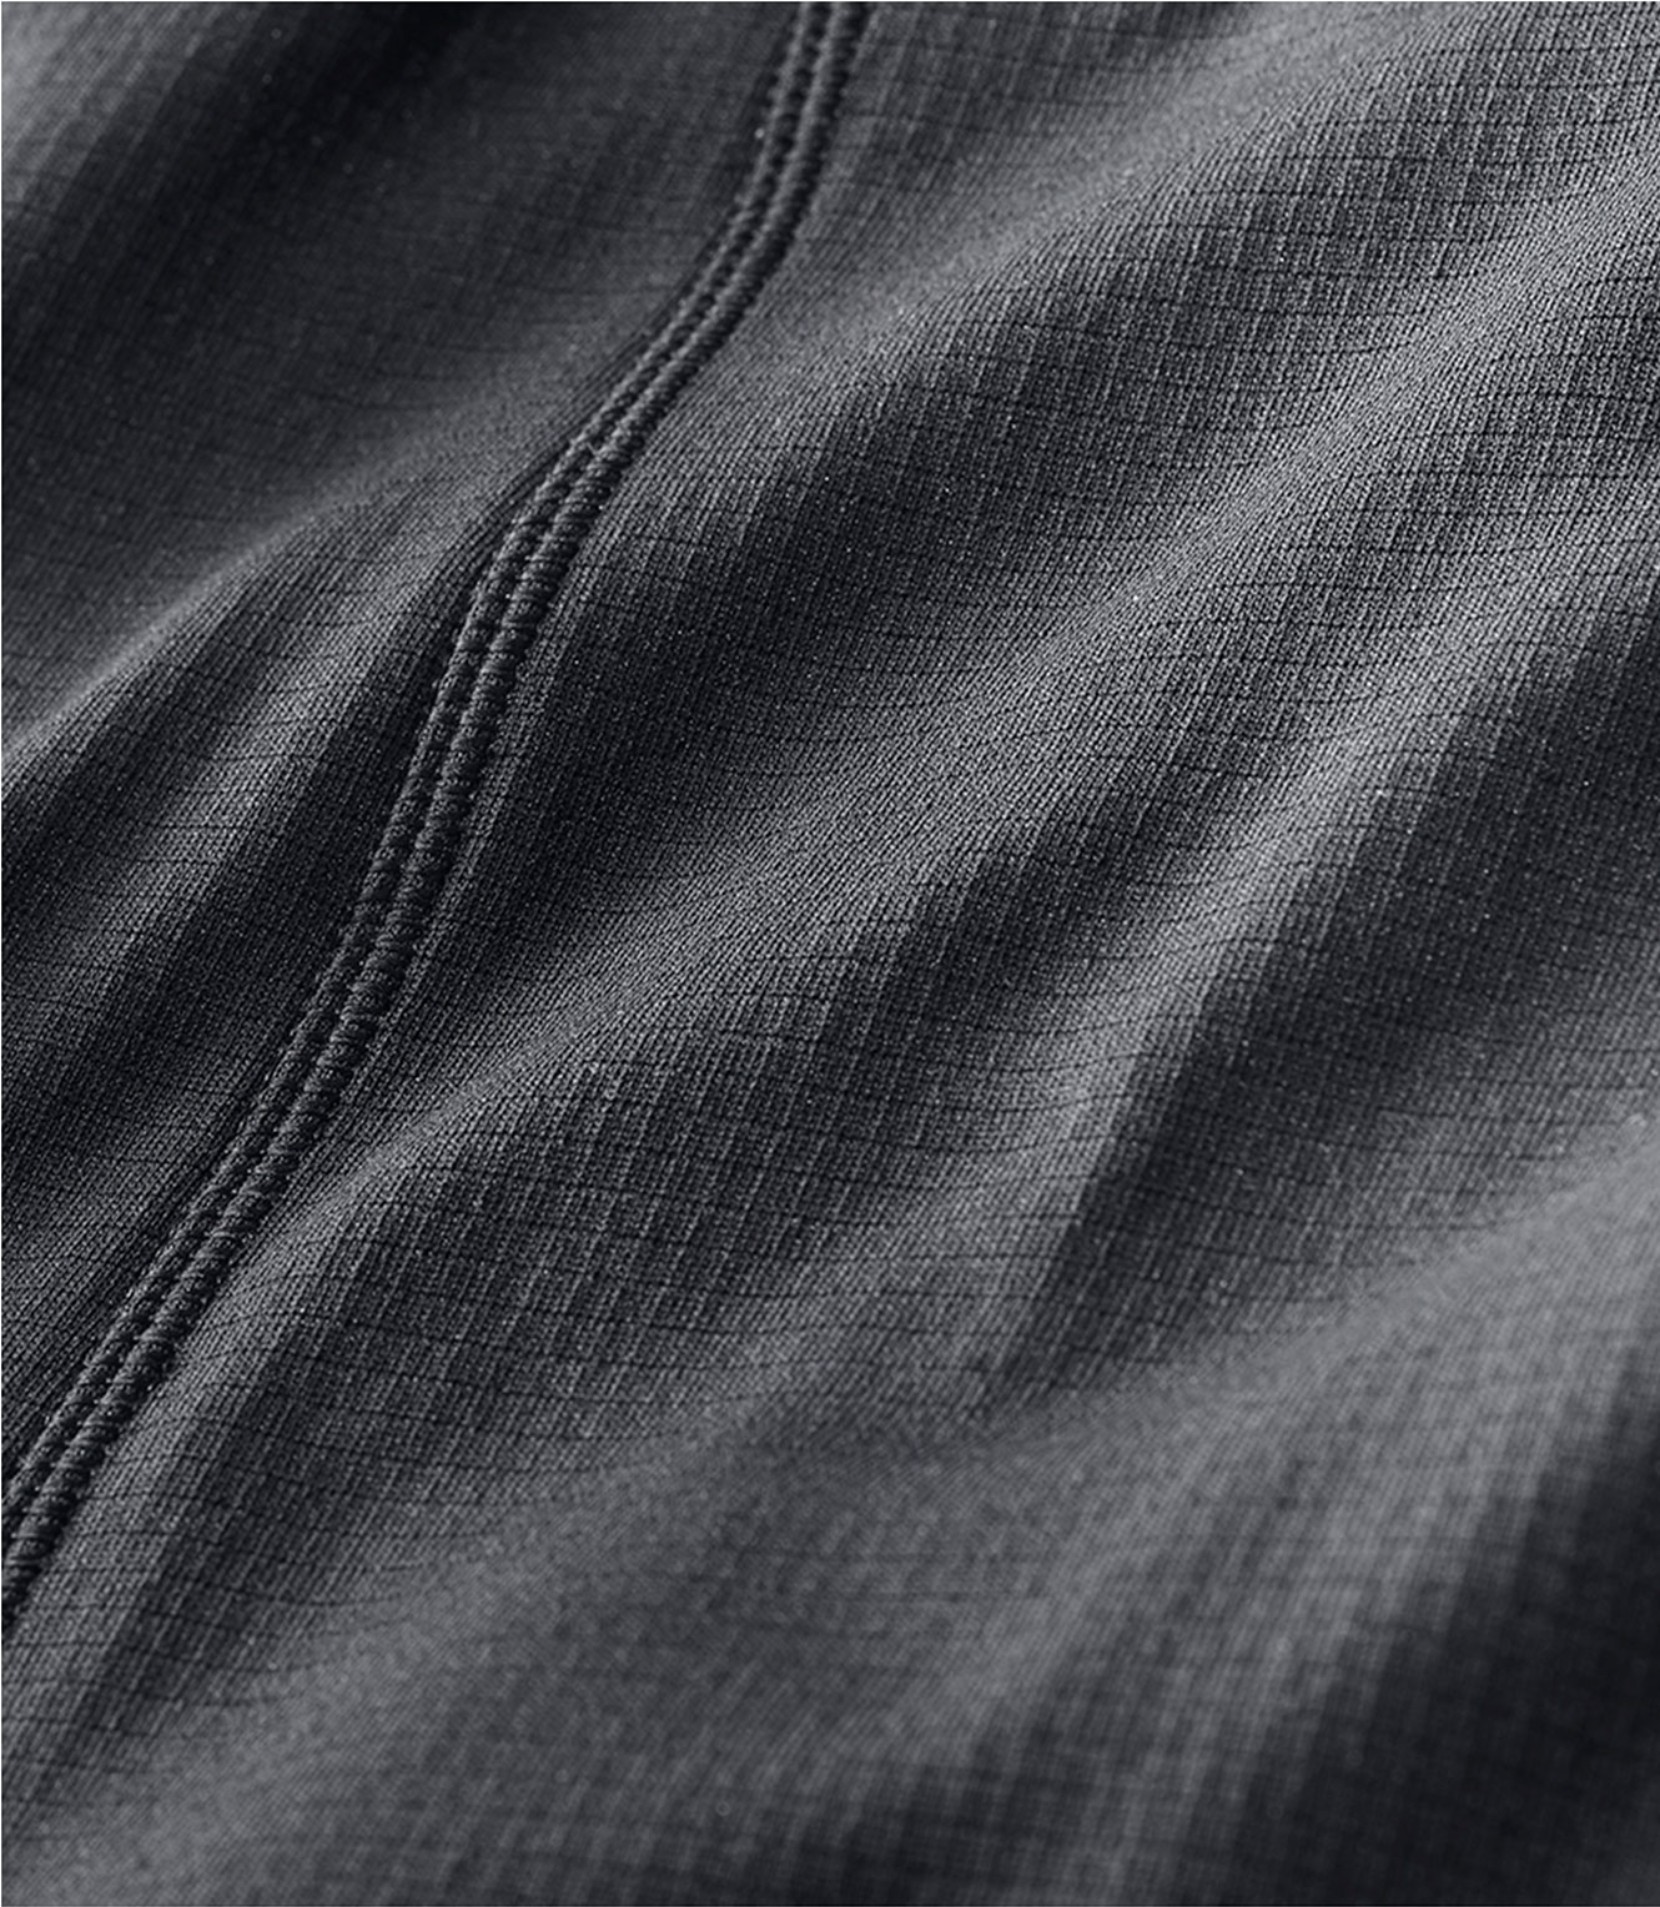 Image of synthetic fabric